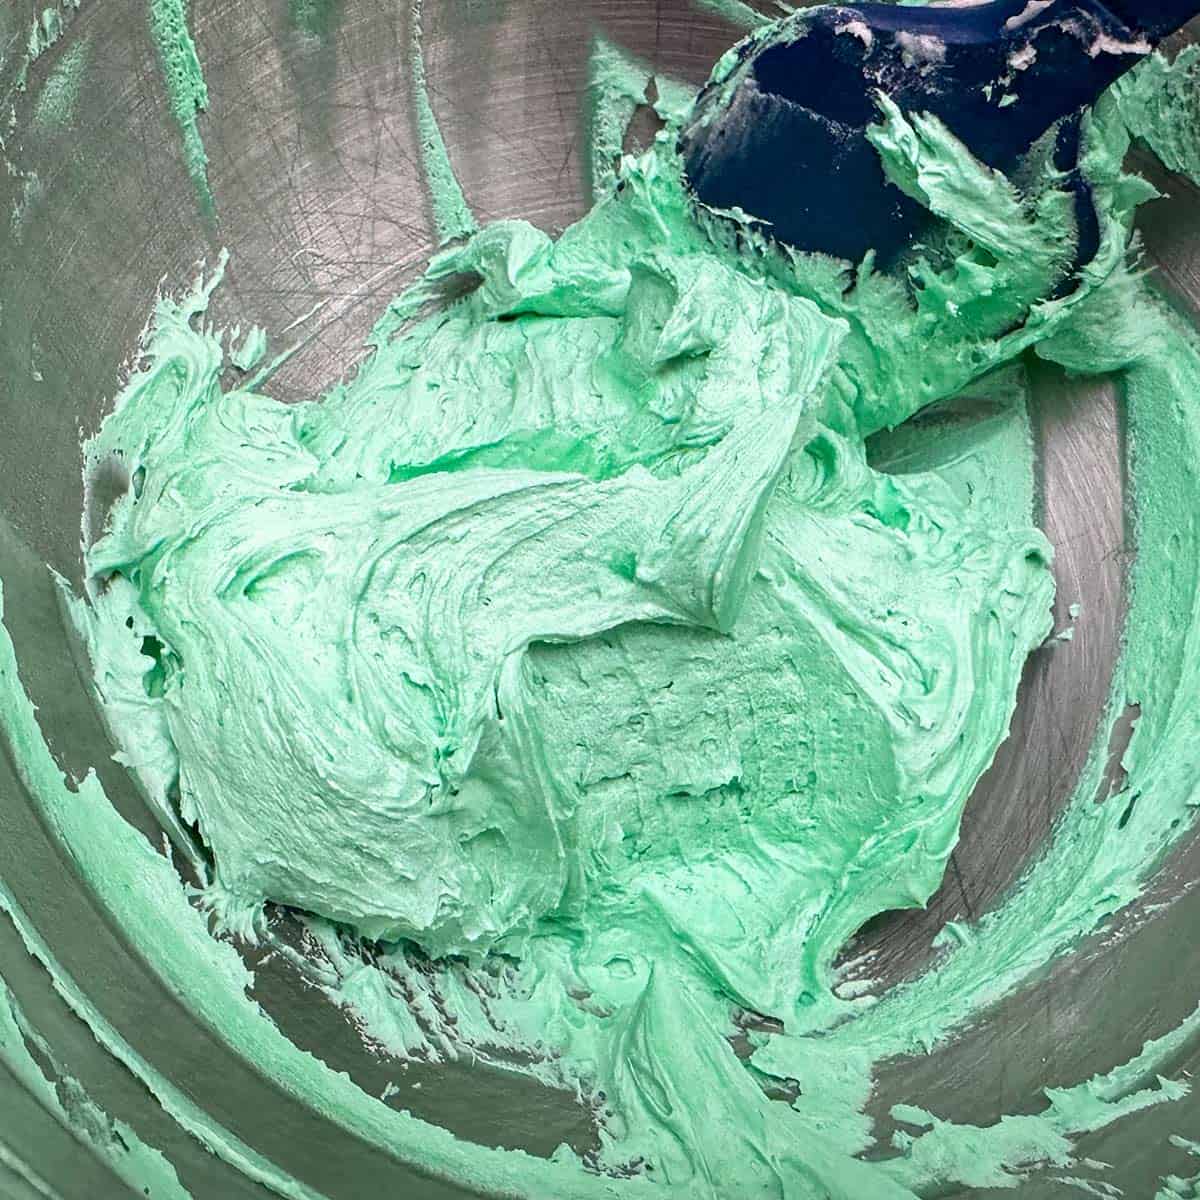 Finished green colored orange buttercream icing.